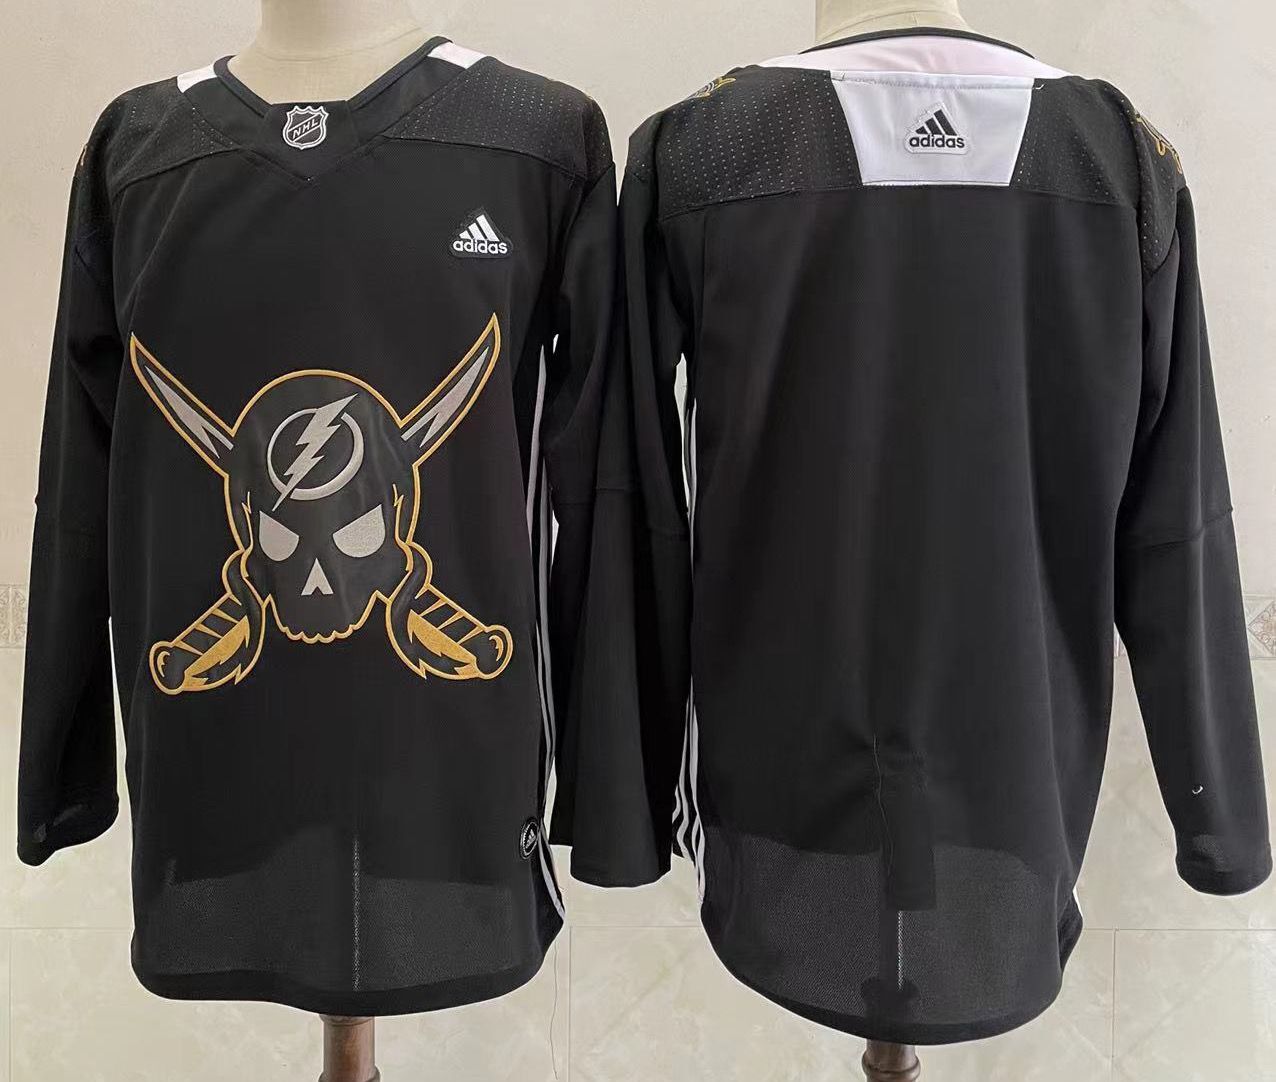 Men's Tampa Bay Lightning Blank Black Pirate Themed Warmup Authe